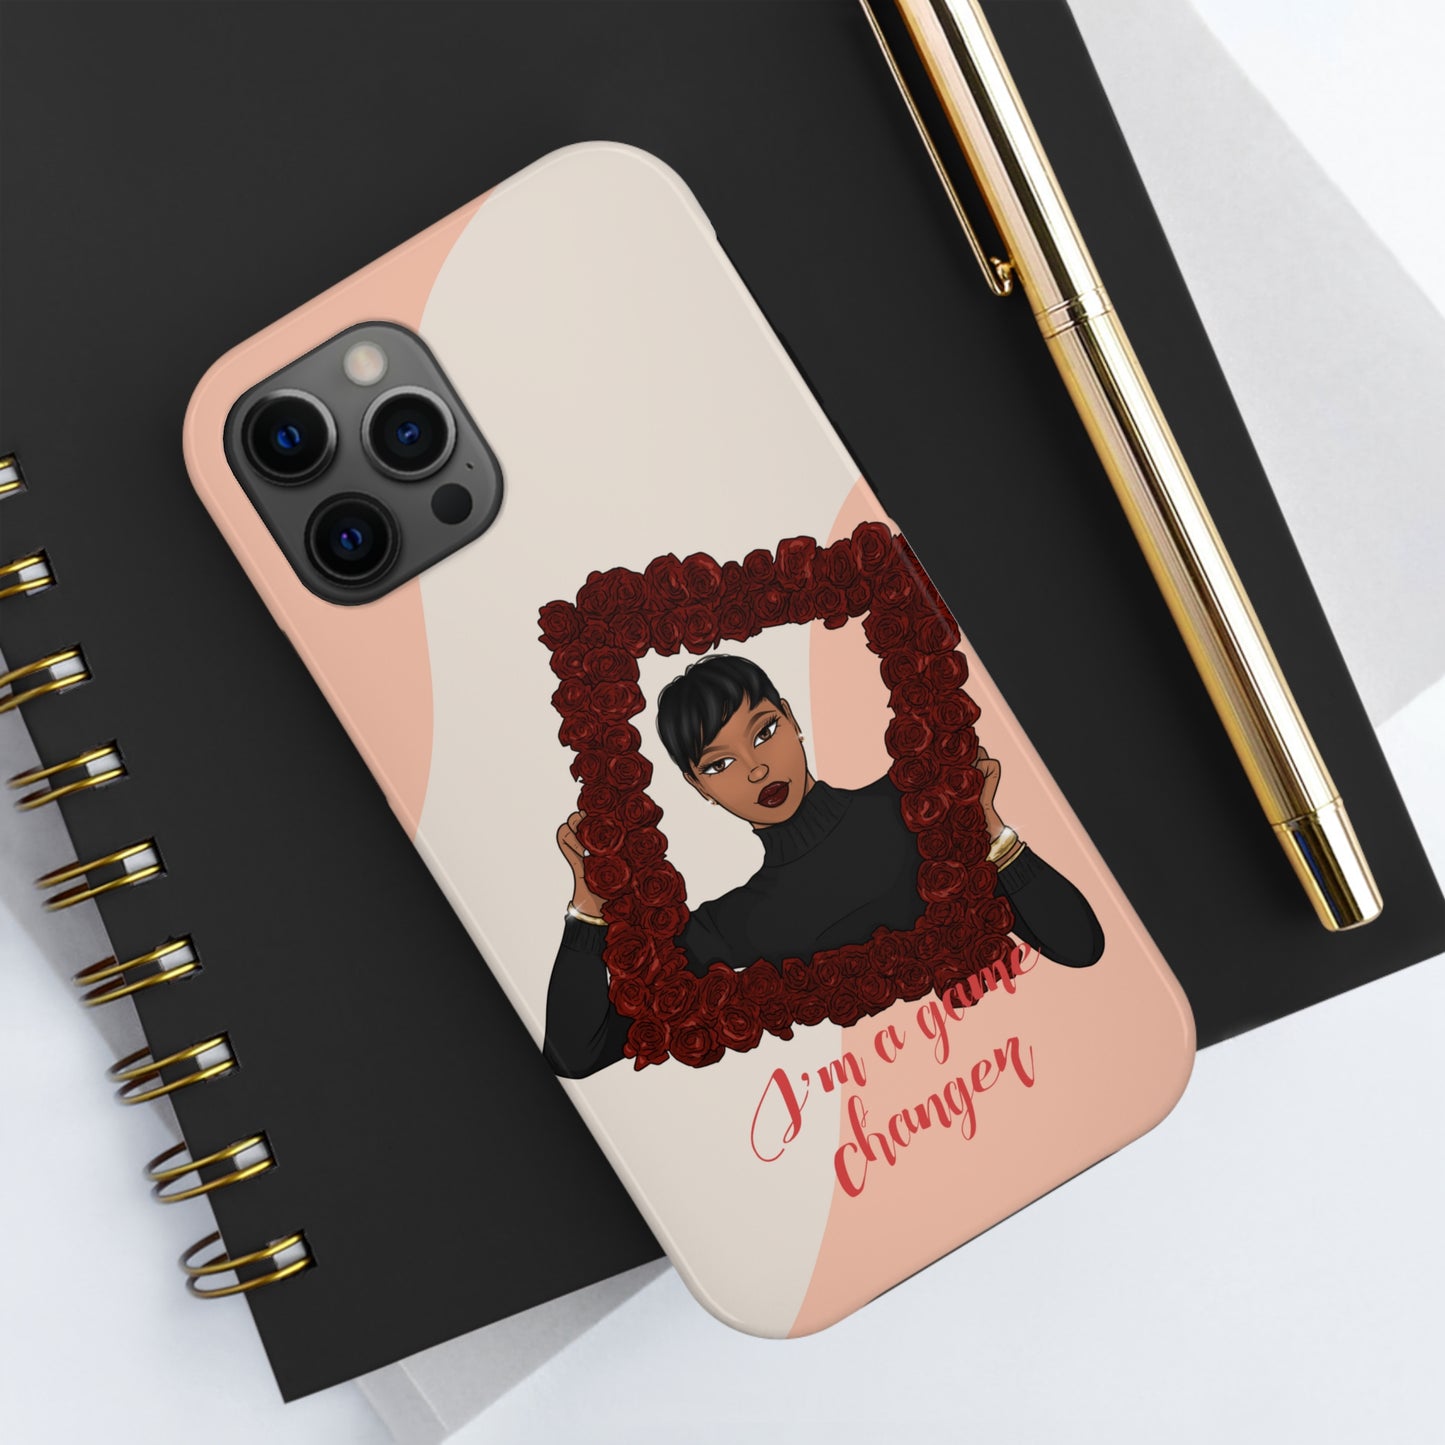 I'm A Game Changer Tough iPhone Cases